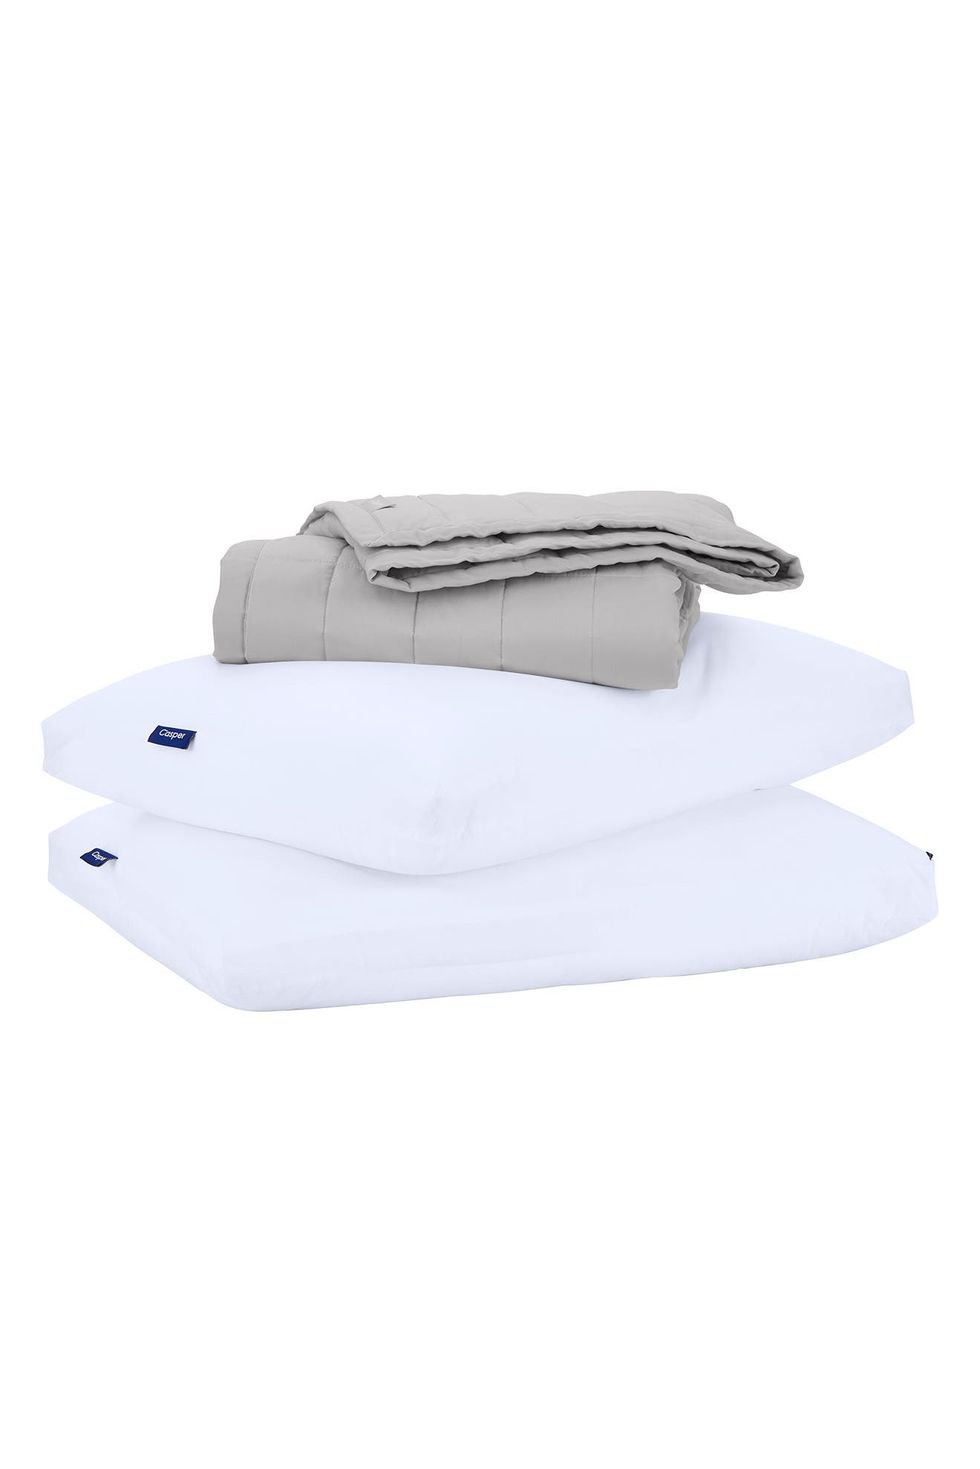 Weighted Blanket & Two Pillows Set